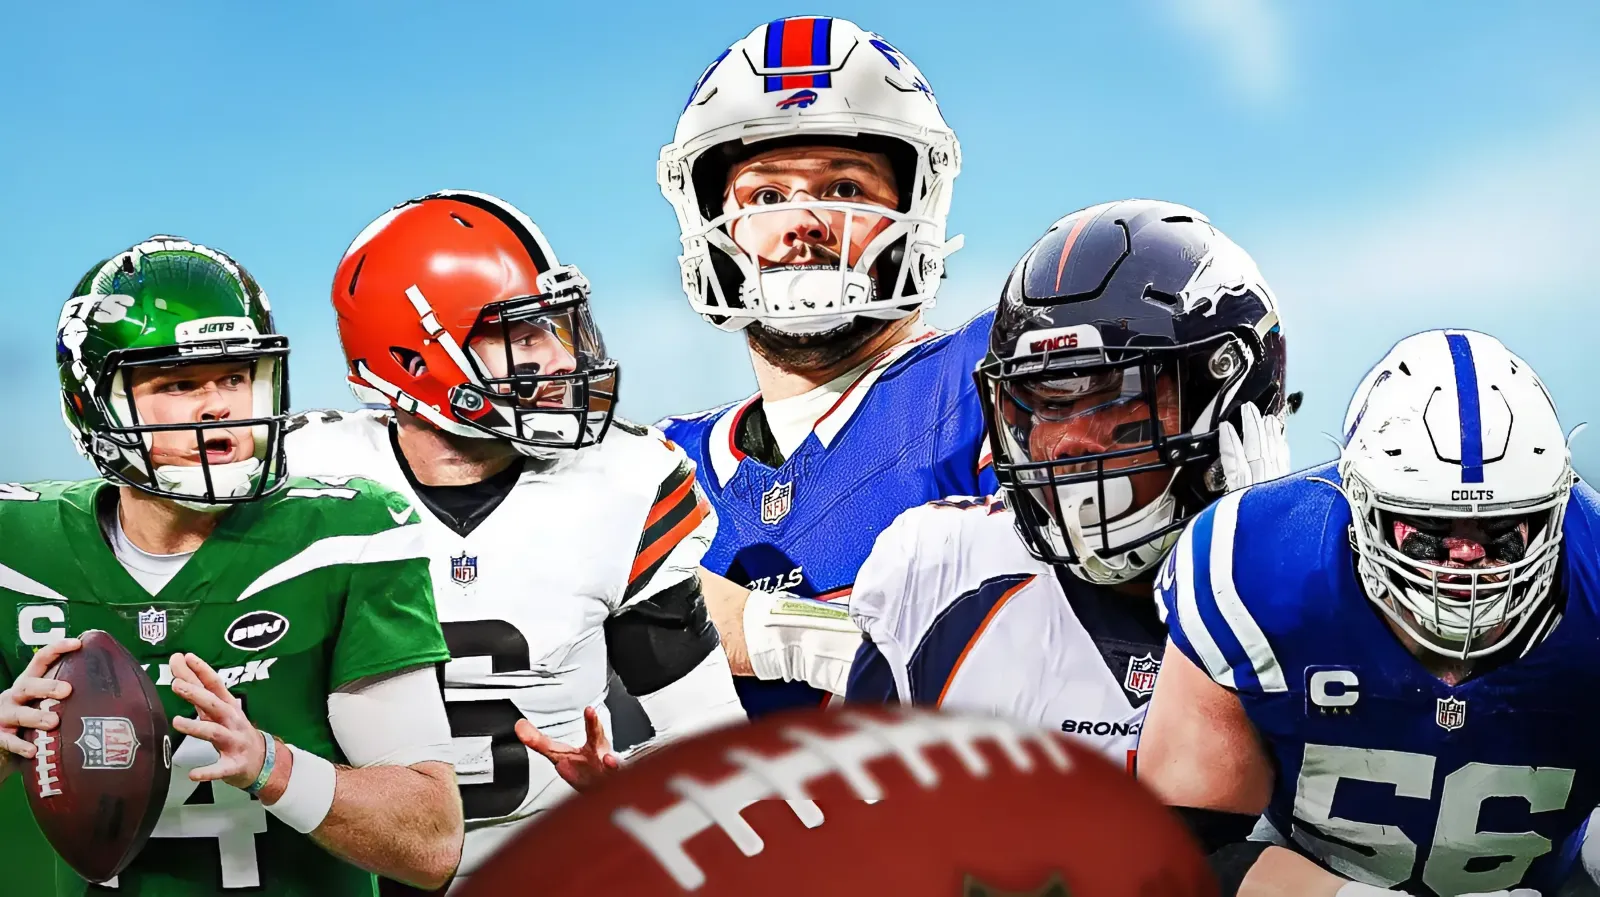 How did the careers pan out for the 5 players picked ahead of Josh Allen?